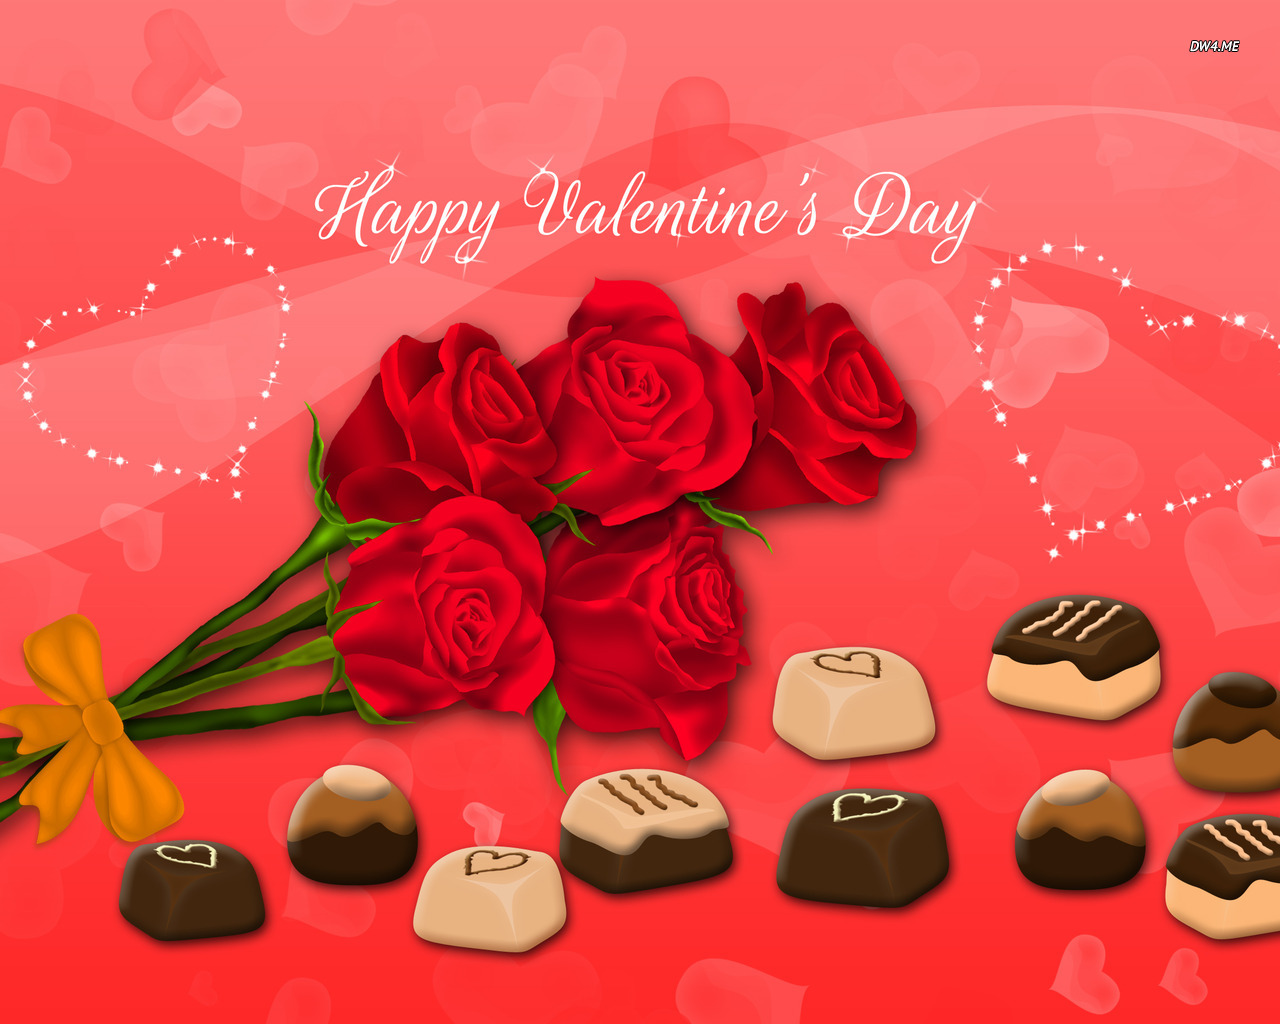 Happy Valentines Day wallpaper   Holiday wallpapers   1094